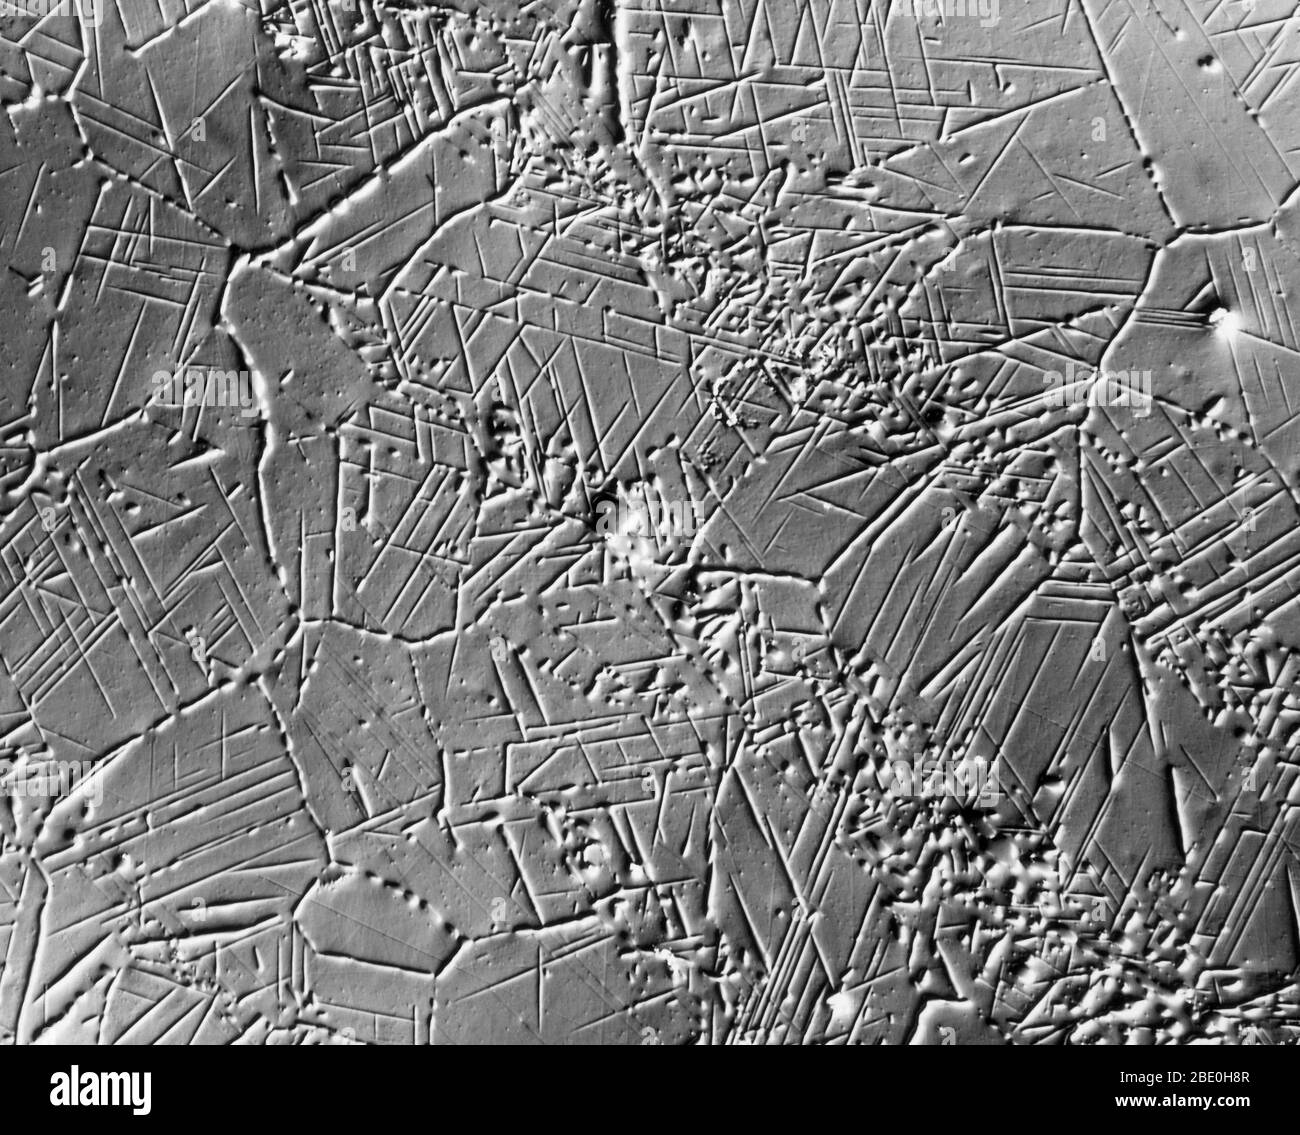 Scanning Electron Micrograph (SEM) showing sigma-phase crystallization in steel. Magnification: 500X at 8x10'. Nomarski interference contrast method. Stock Photo